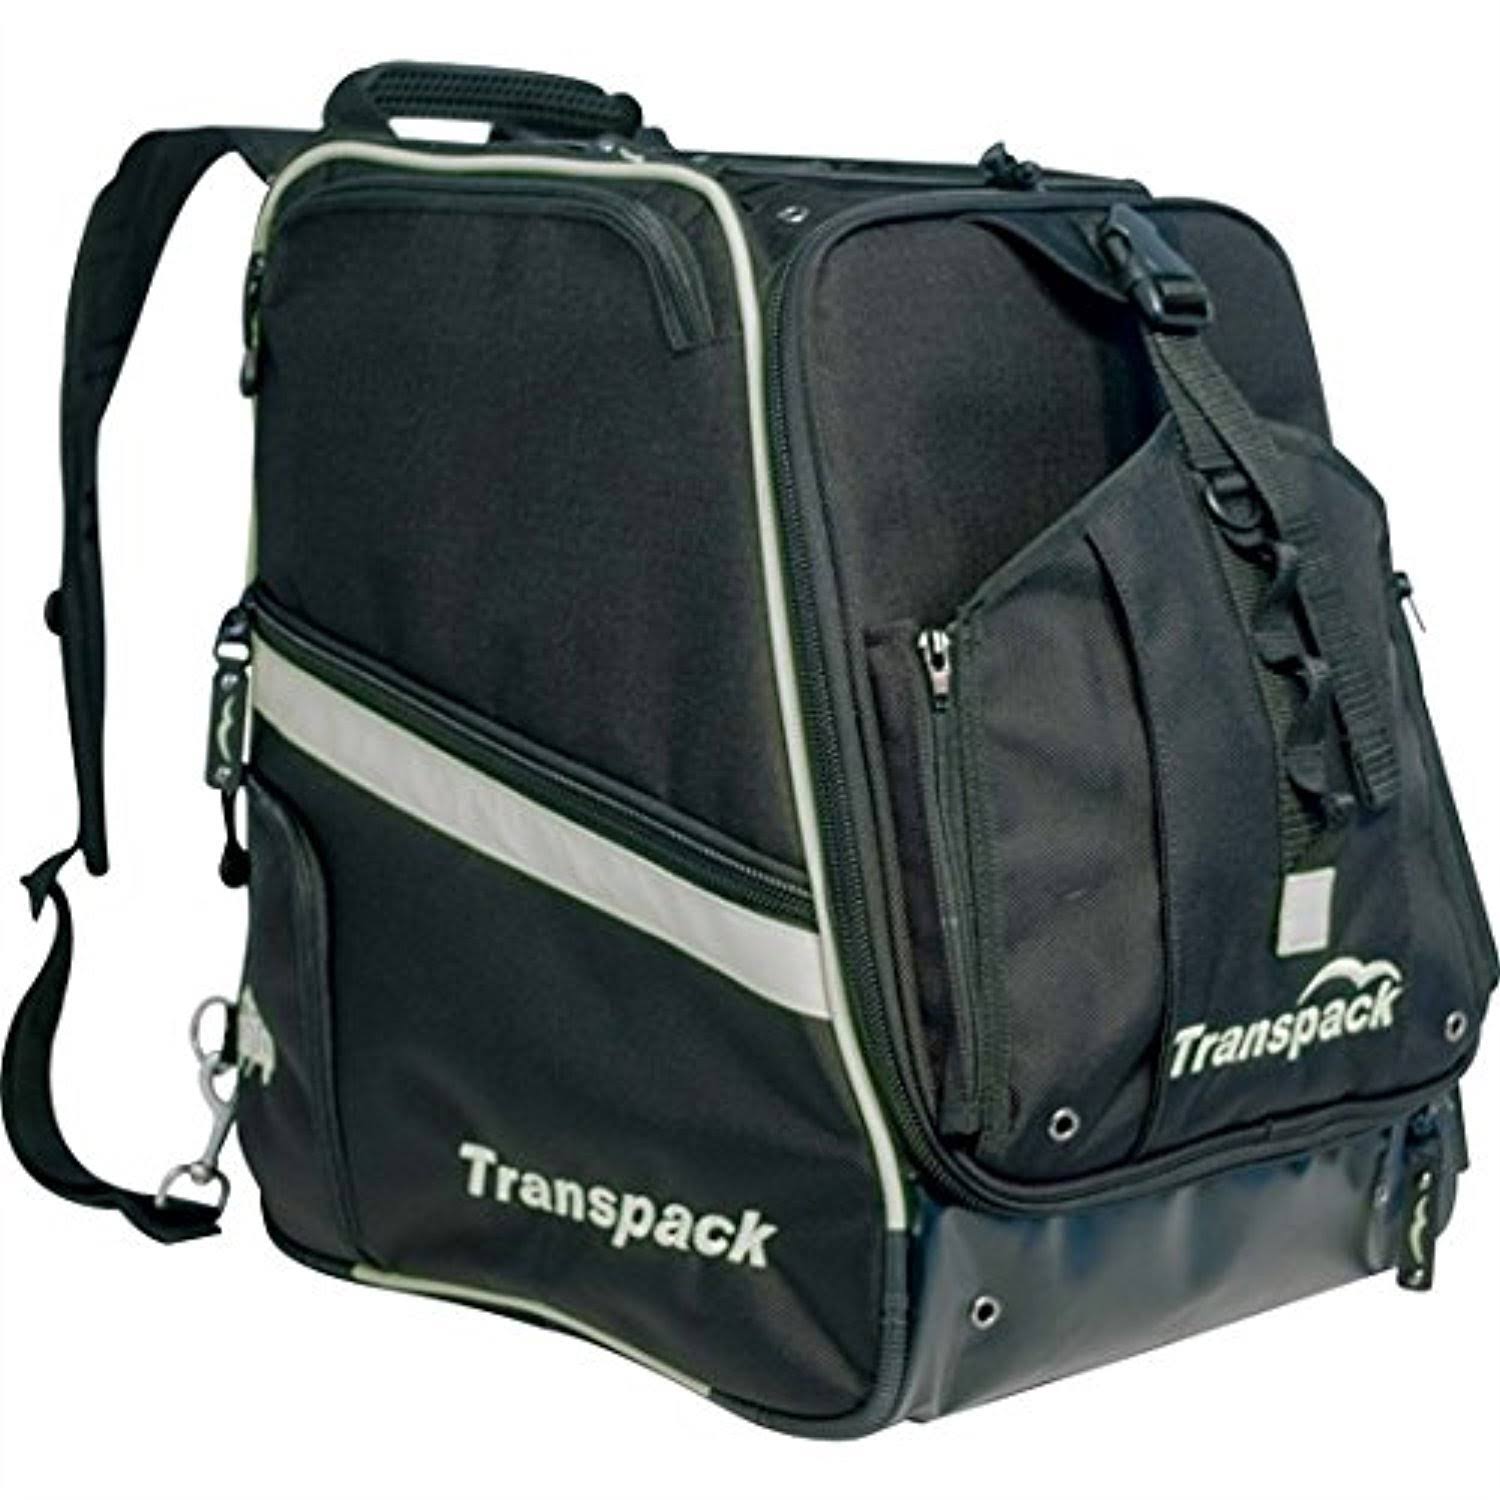 Transpack - Heated Boot Pro Bag - Black Silver